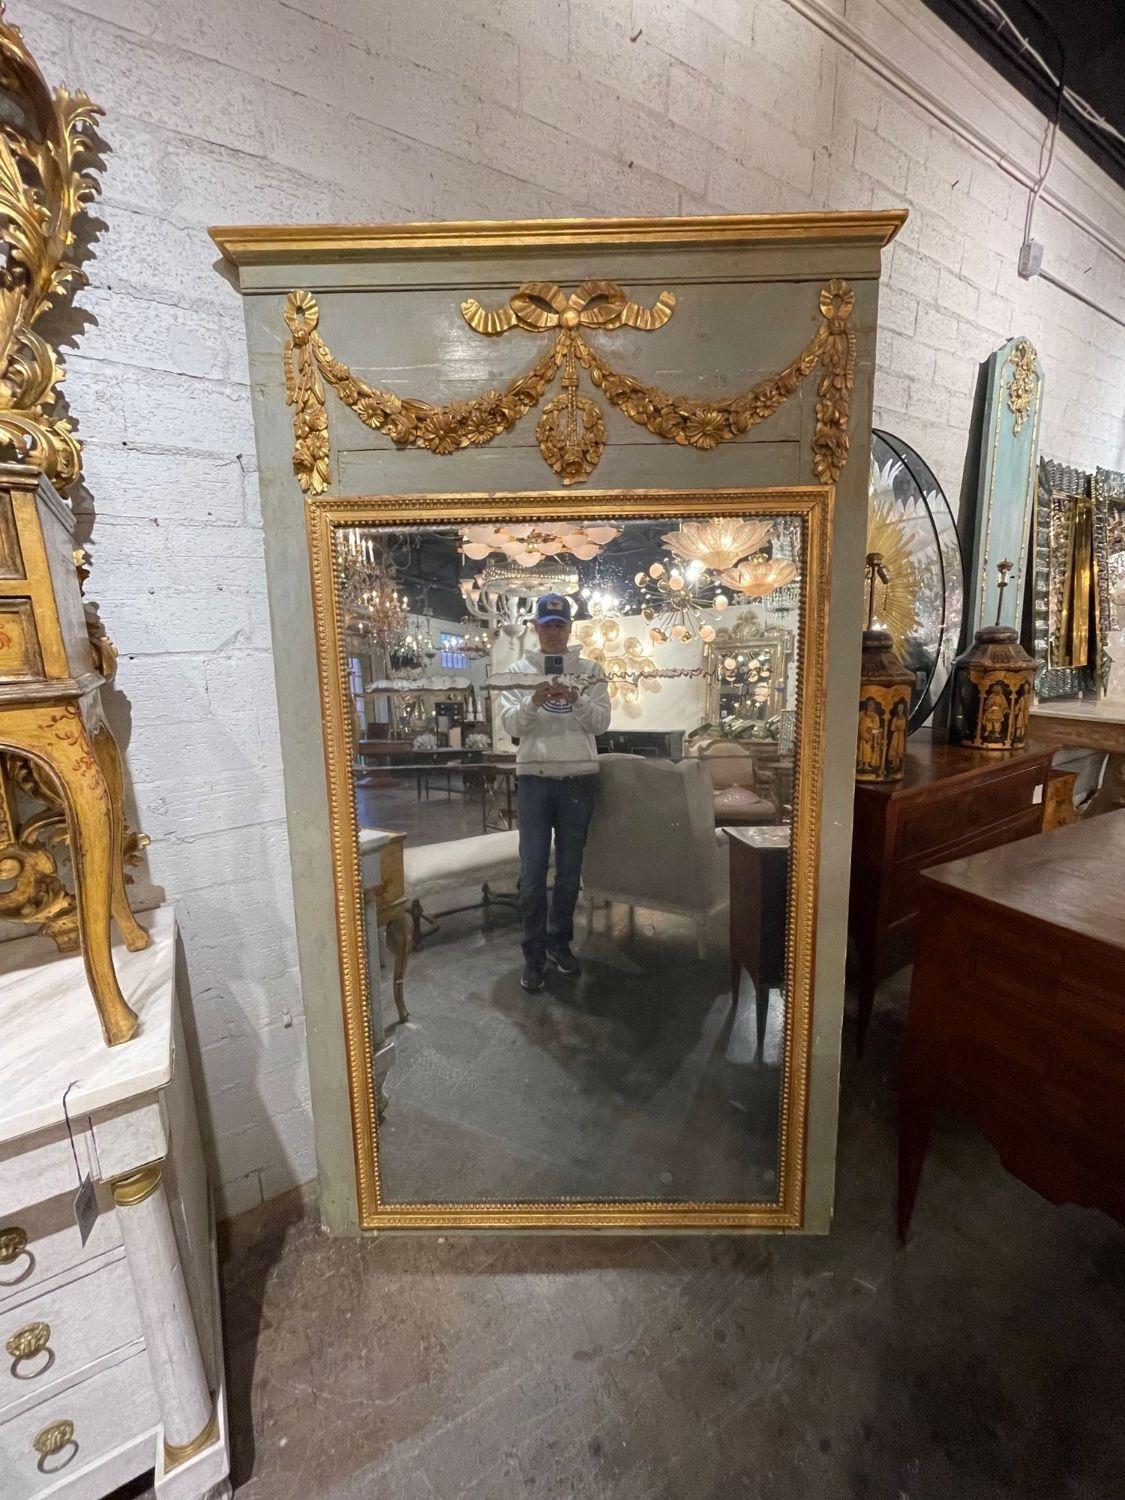 Fabulous 18th century French carved and parcel gilt Trumeau mirror. Featuring a beautiful carvings and patina. The piece also has a divided mirror with original mercury glass. Simply gorgeous!!